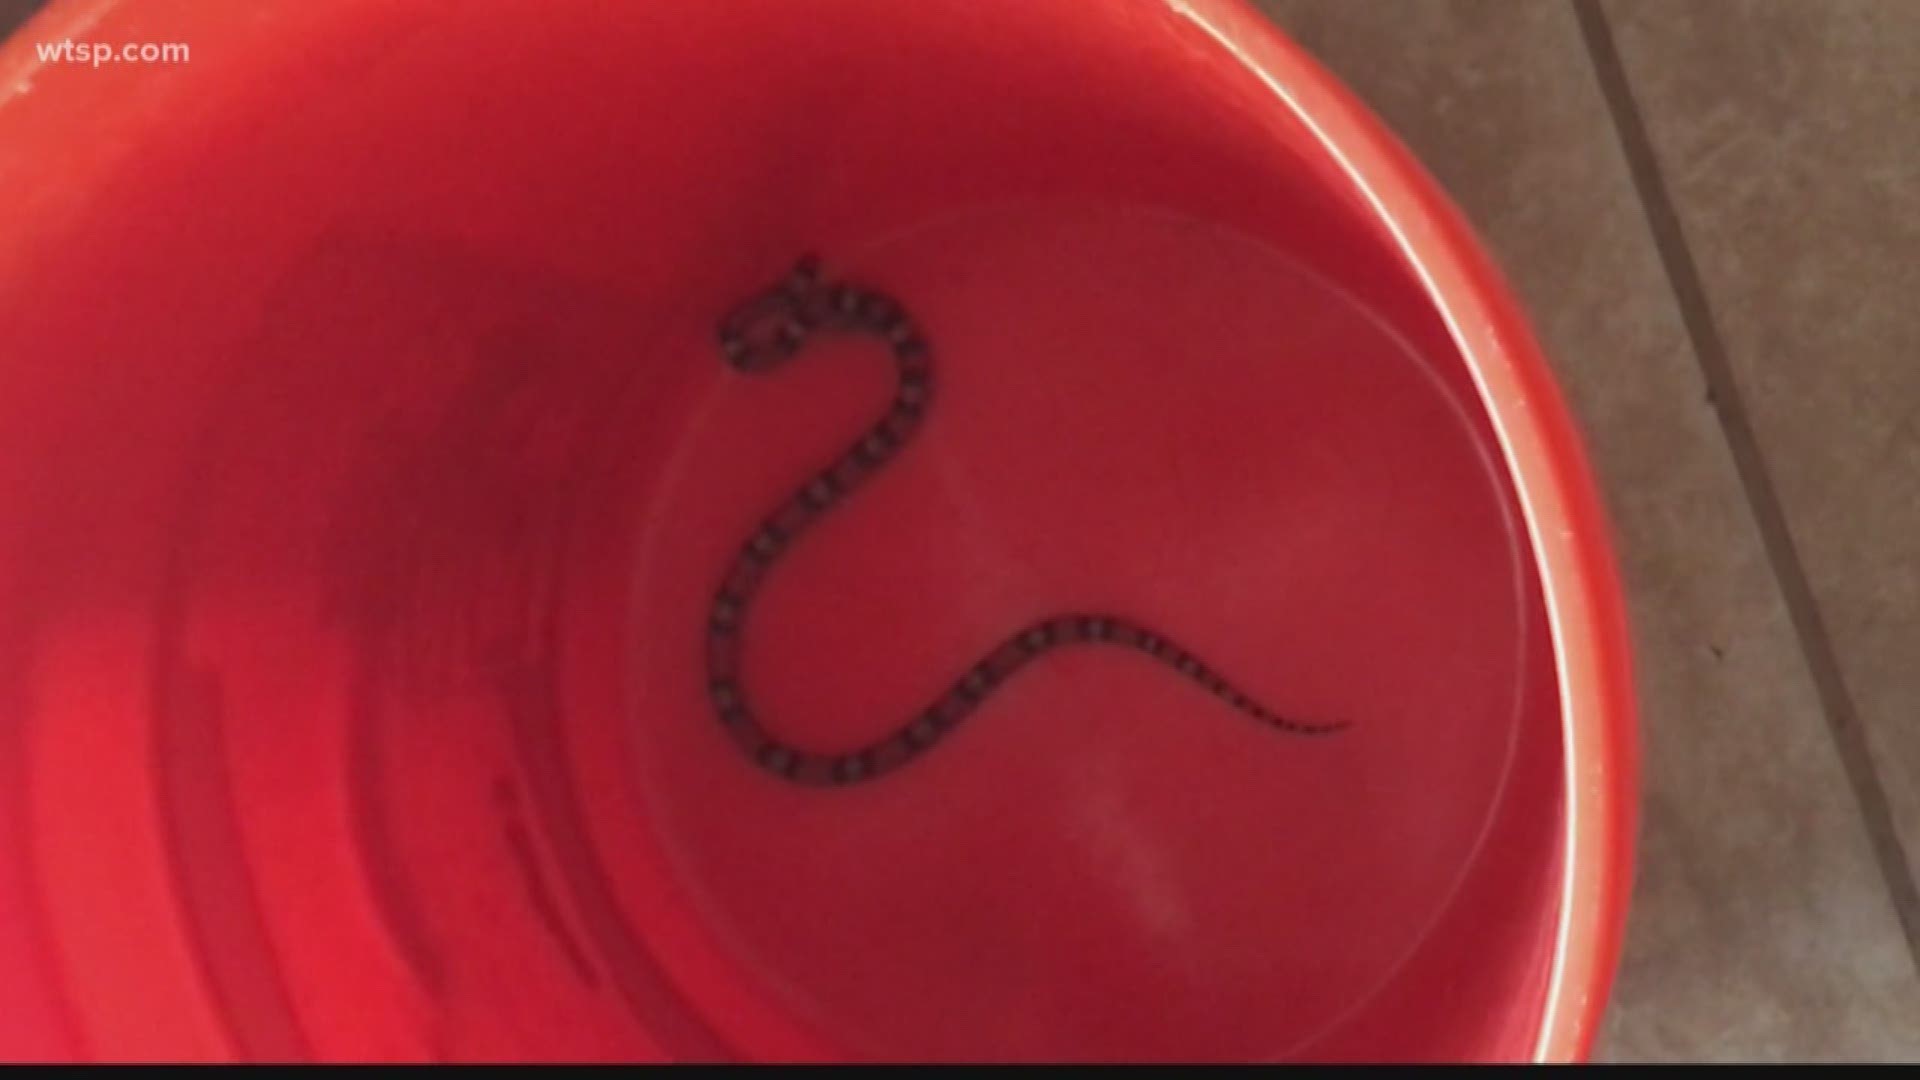 According to FWC, you're more likely to see snakes in the summer, and the rain we've been seeing brings them out as well, but one local pest control agency says they believe there is another factor. 

Affordable Wildlife Removal tells 10News they have noticed an increase in calls for snakes in or around people's homes, and they think more development is to blame.